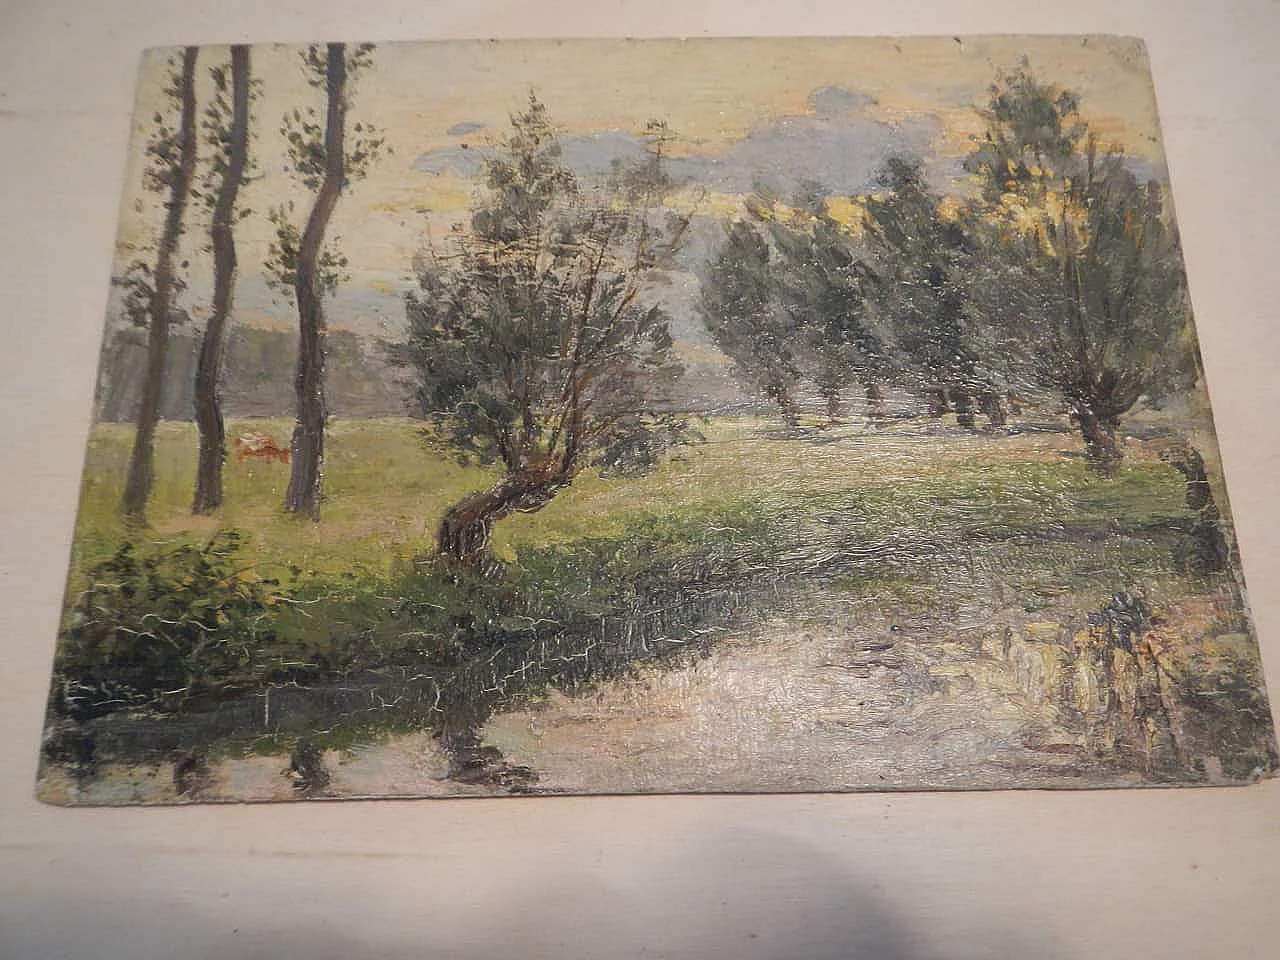 Des Champs, brook, painting on wood, early 20th century 9